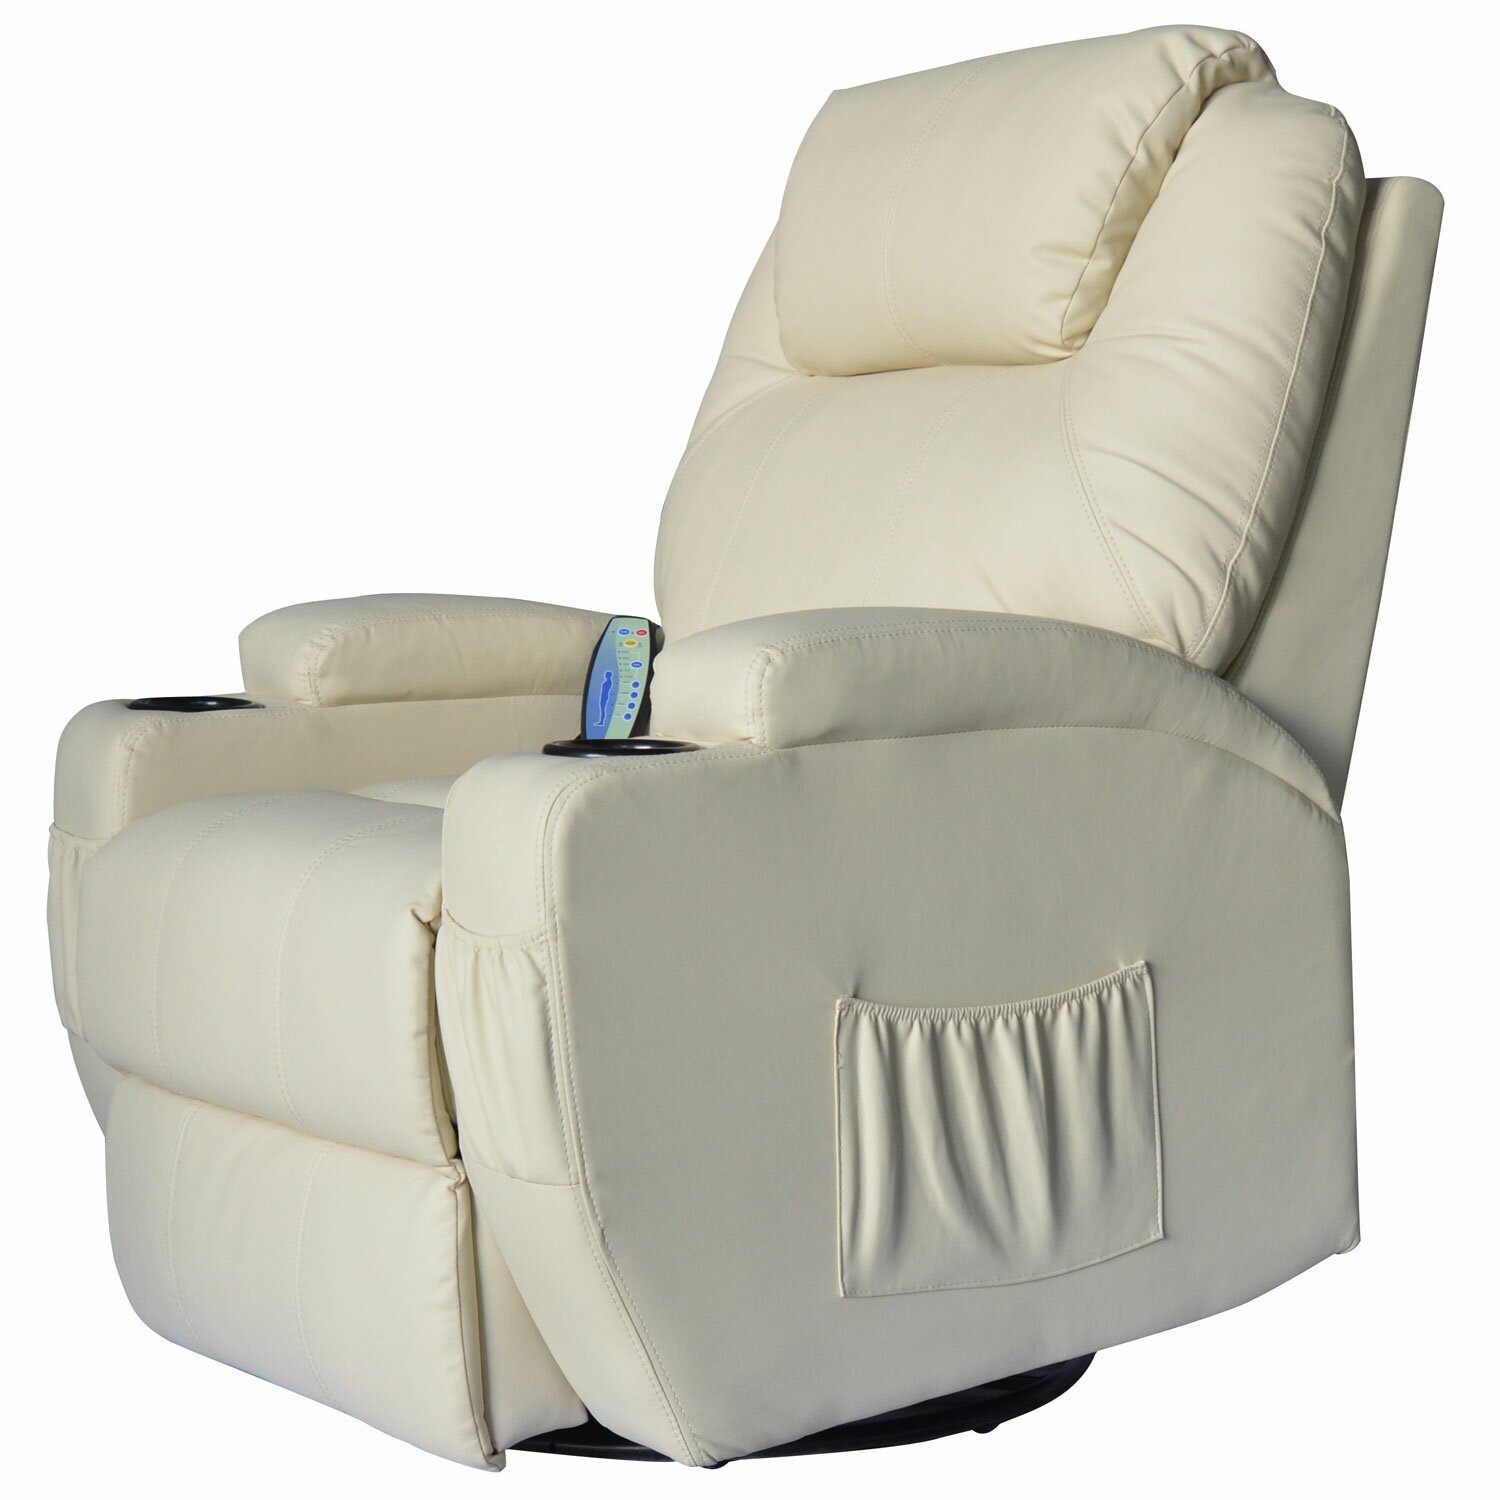 Outsunny HomCom Deluxe Heated Vibrating PU Leather Massage Recliner ...